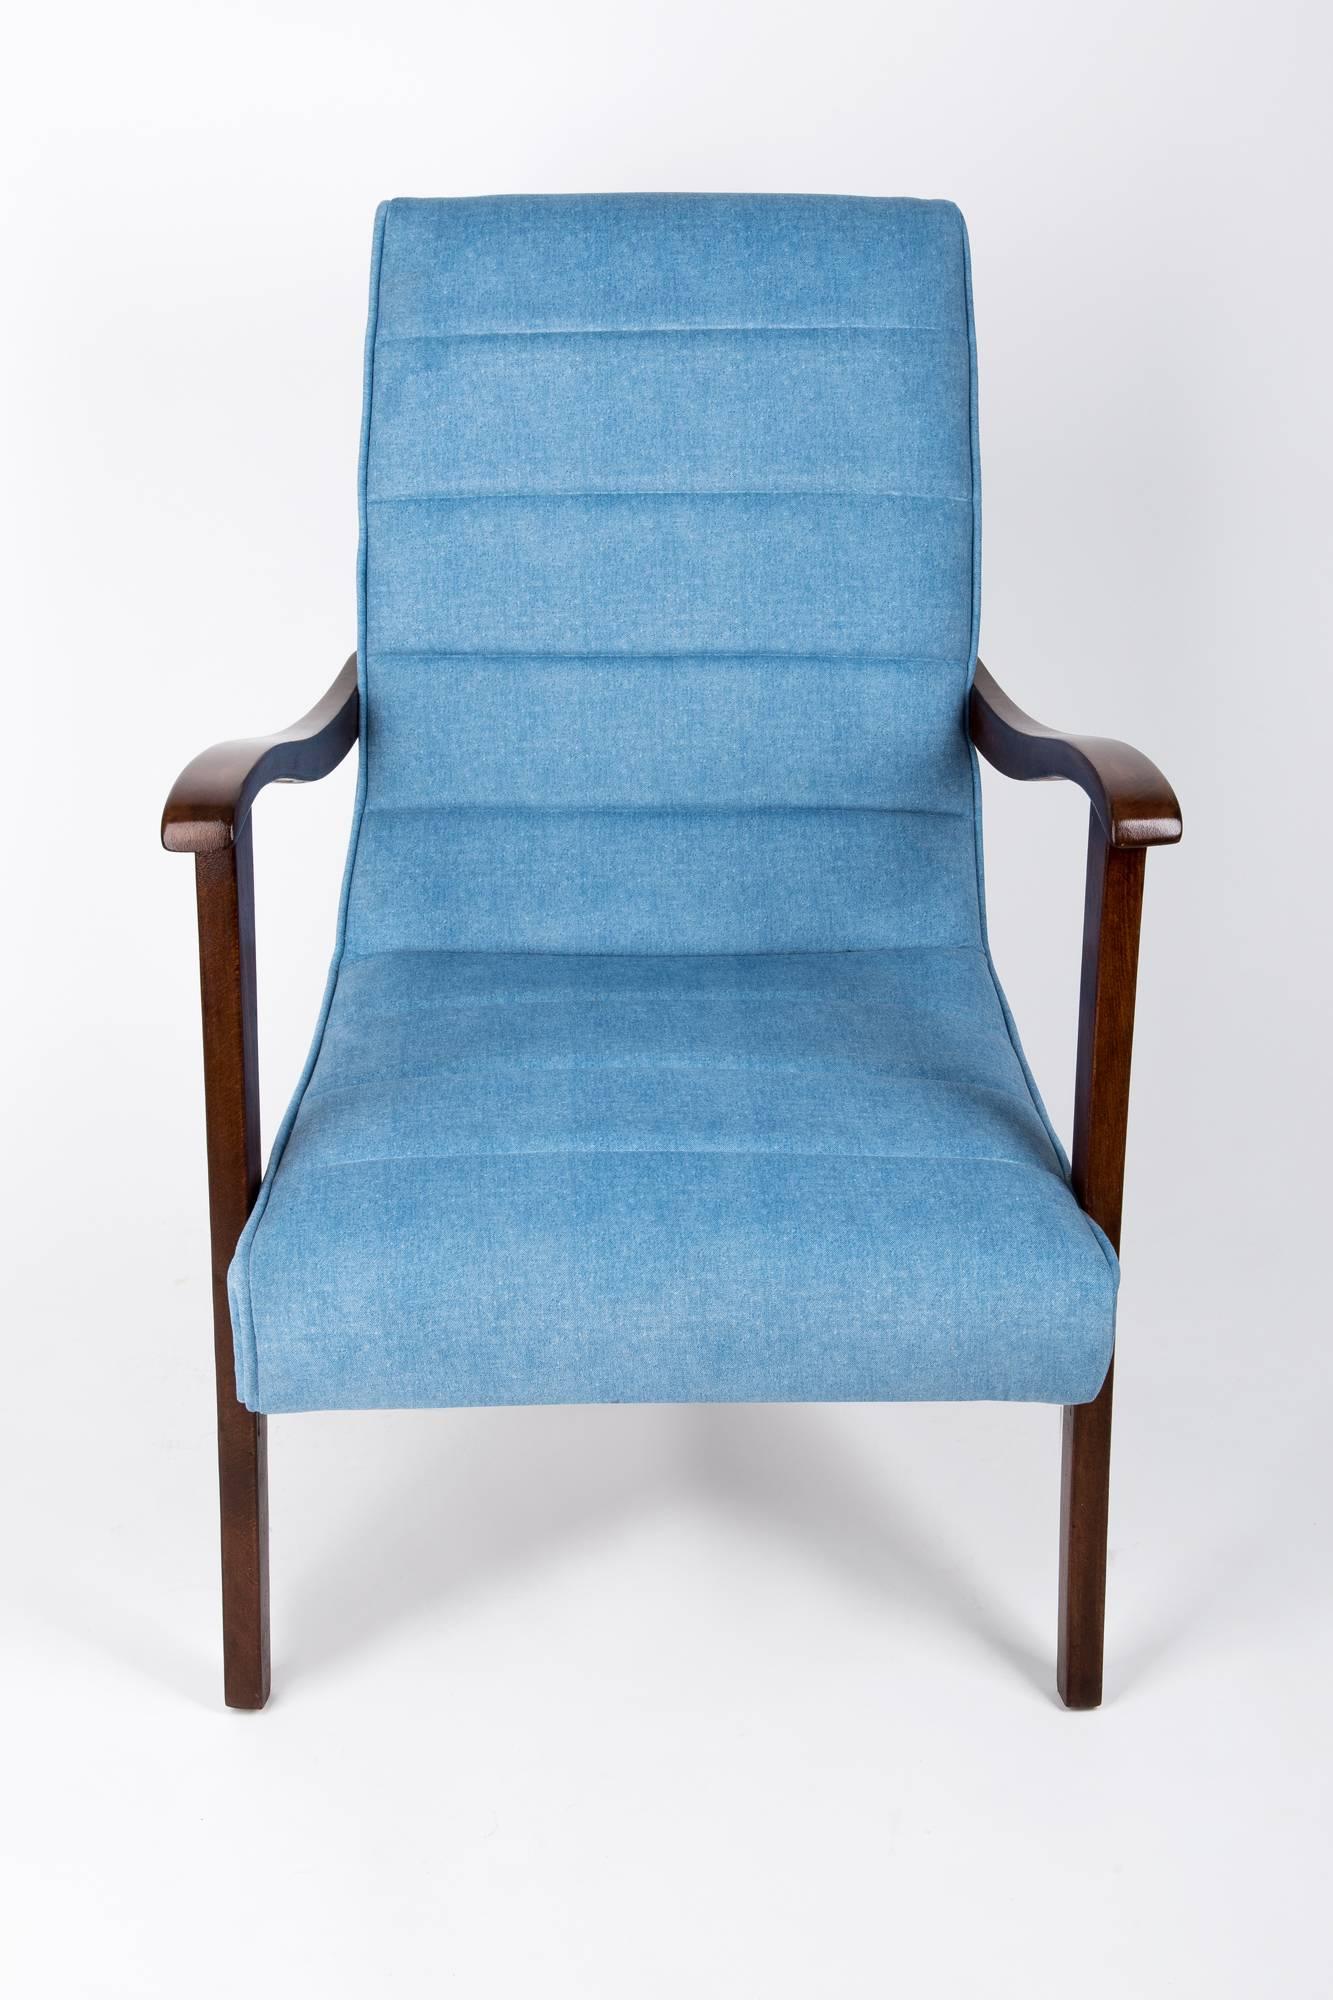 Set of Two Mid-Century Modern Blue Armchairs by Prudnik Factory, 1960s, Poland In Excellent Condition For Sale In 05-080 Hornowek, PL